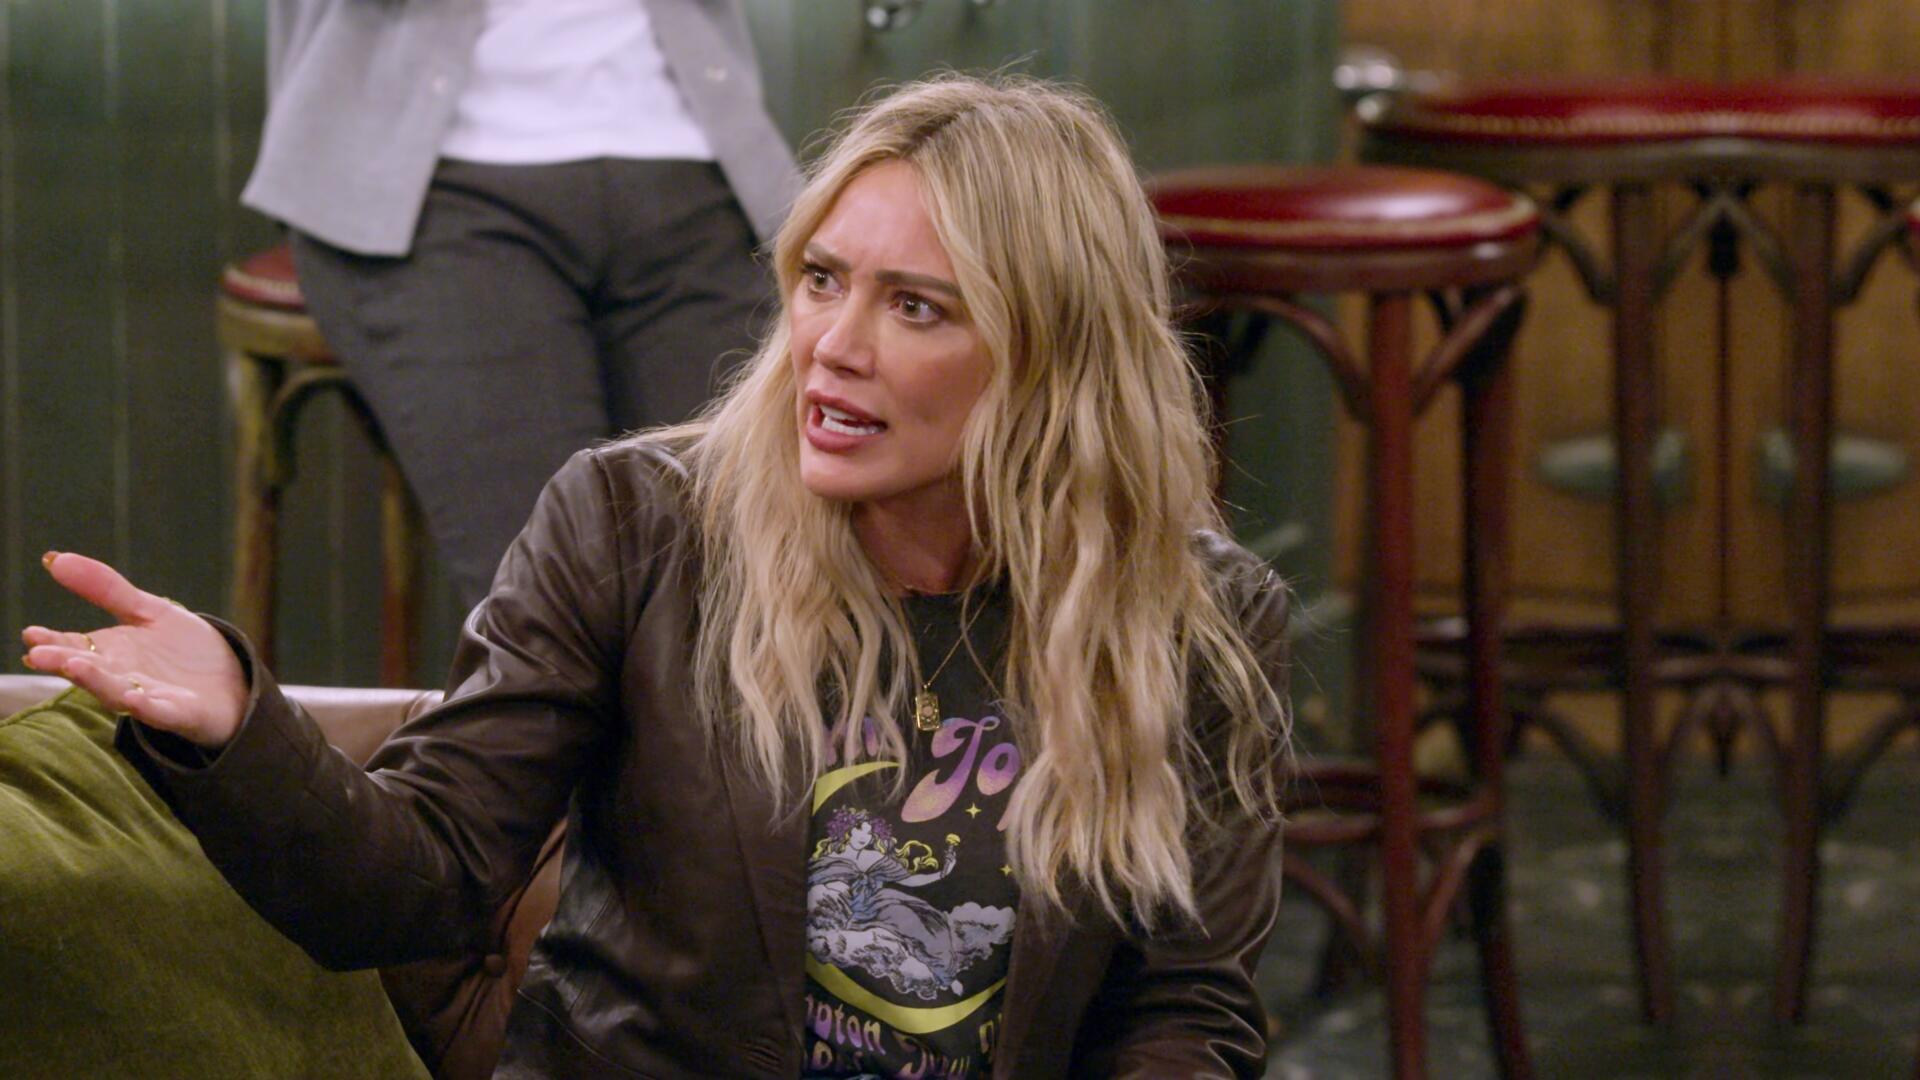 Hilary Duff - How I Met Your Father | Season 2 Episode 8 | Hilary Duff style